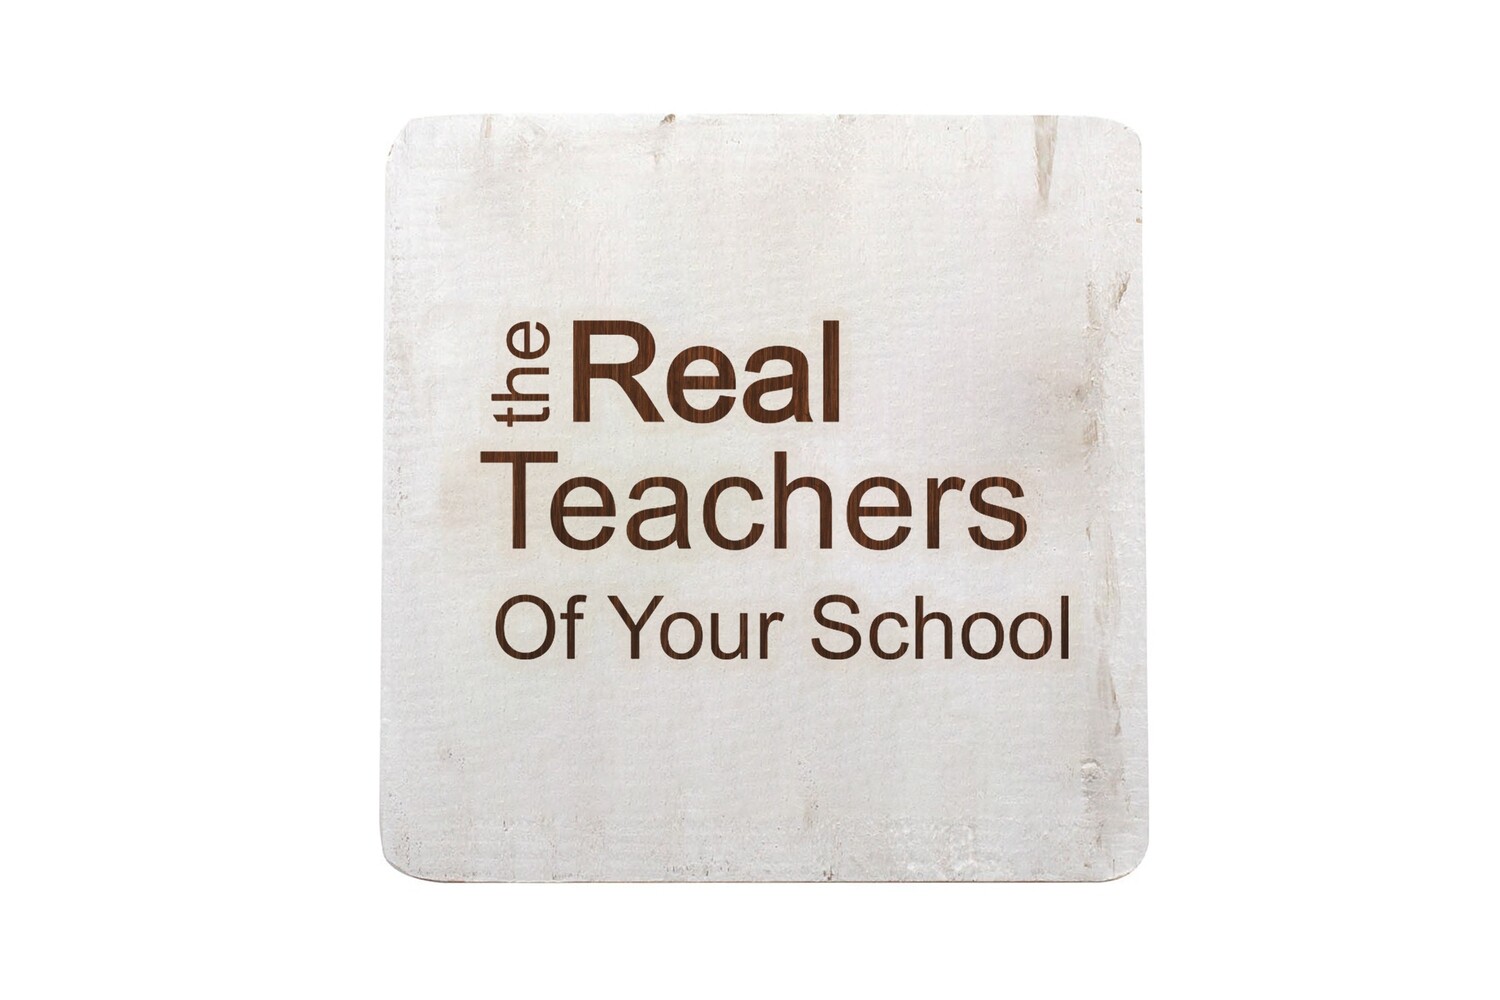 The Real Teachers of (Add Your School) Hand-Painted Wood Coaster Set